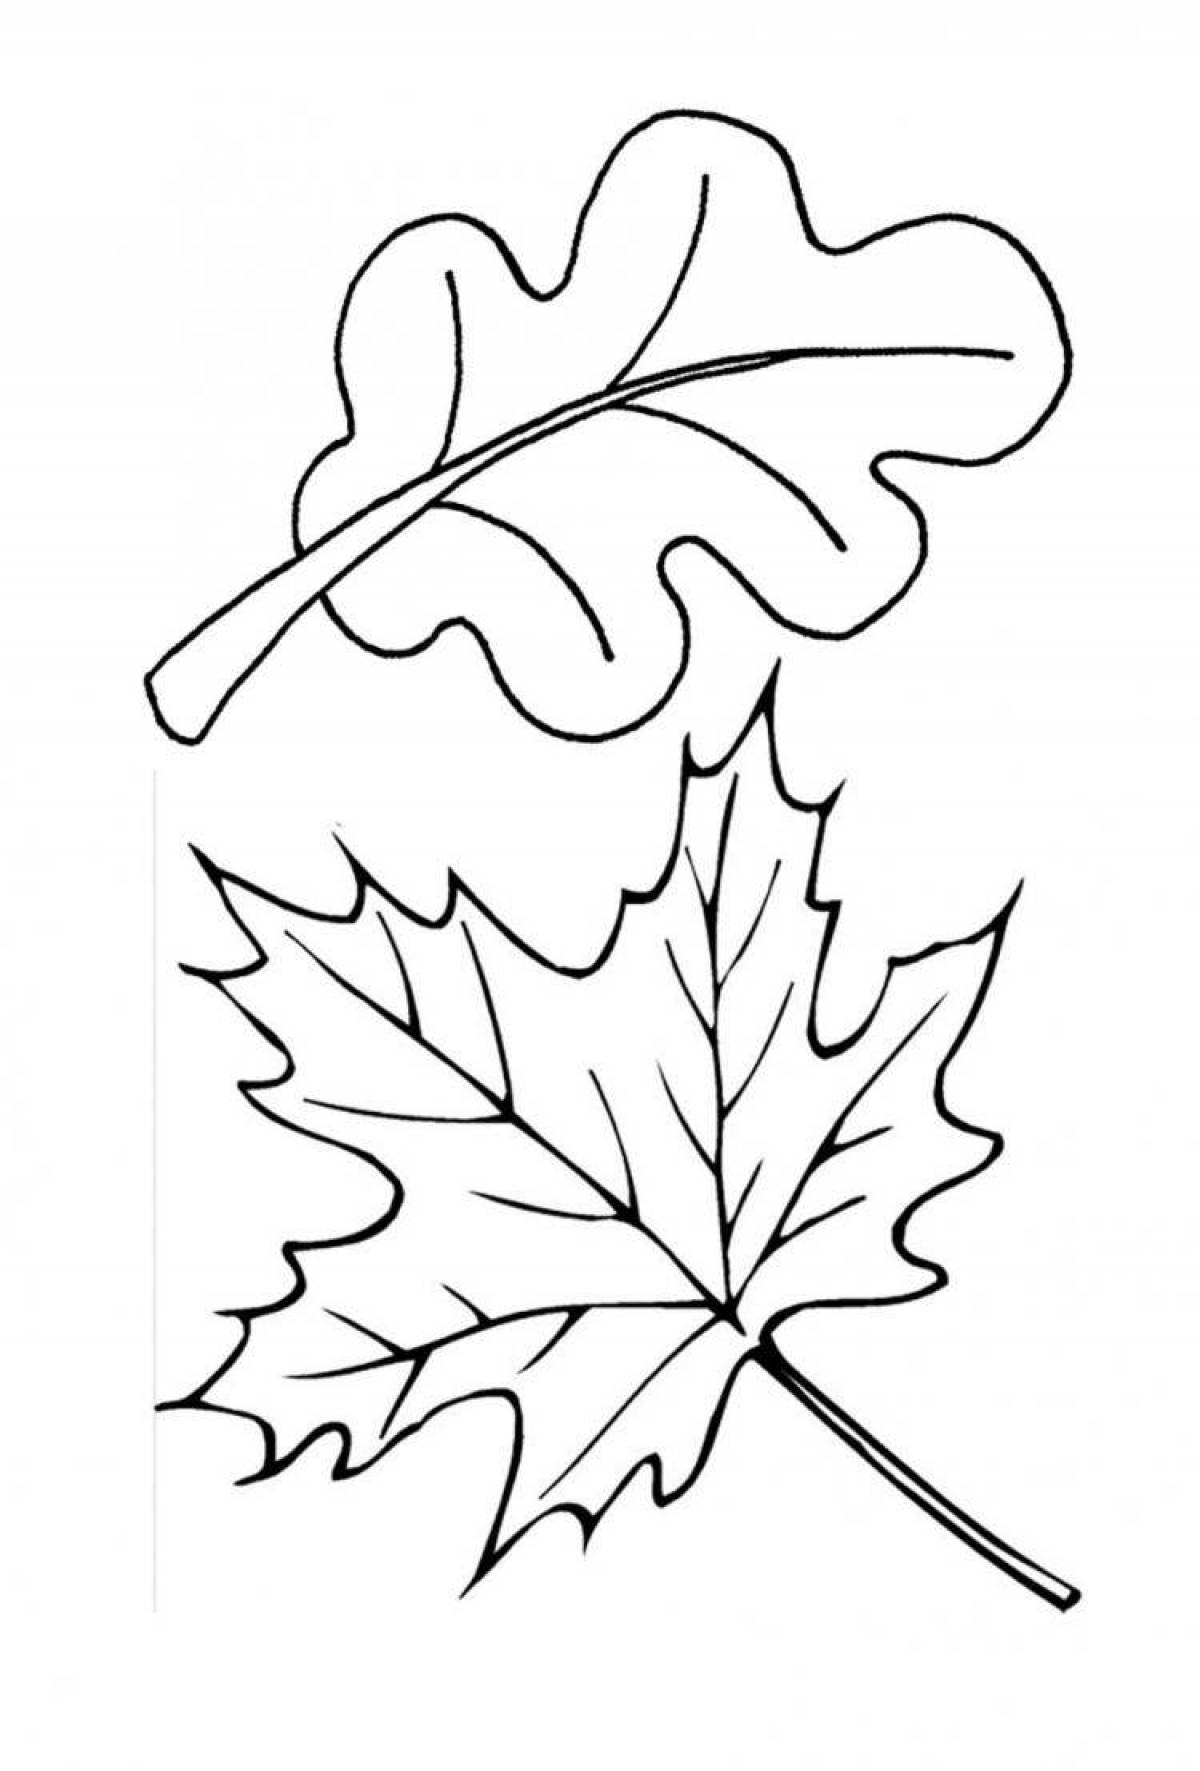 Adorable leaves coloring book for kids